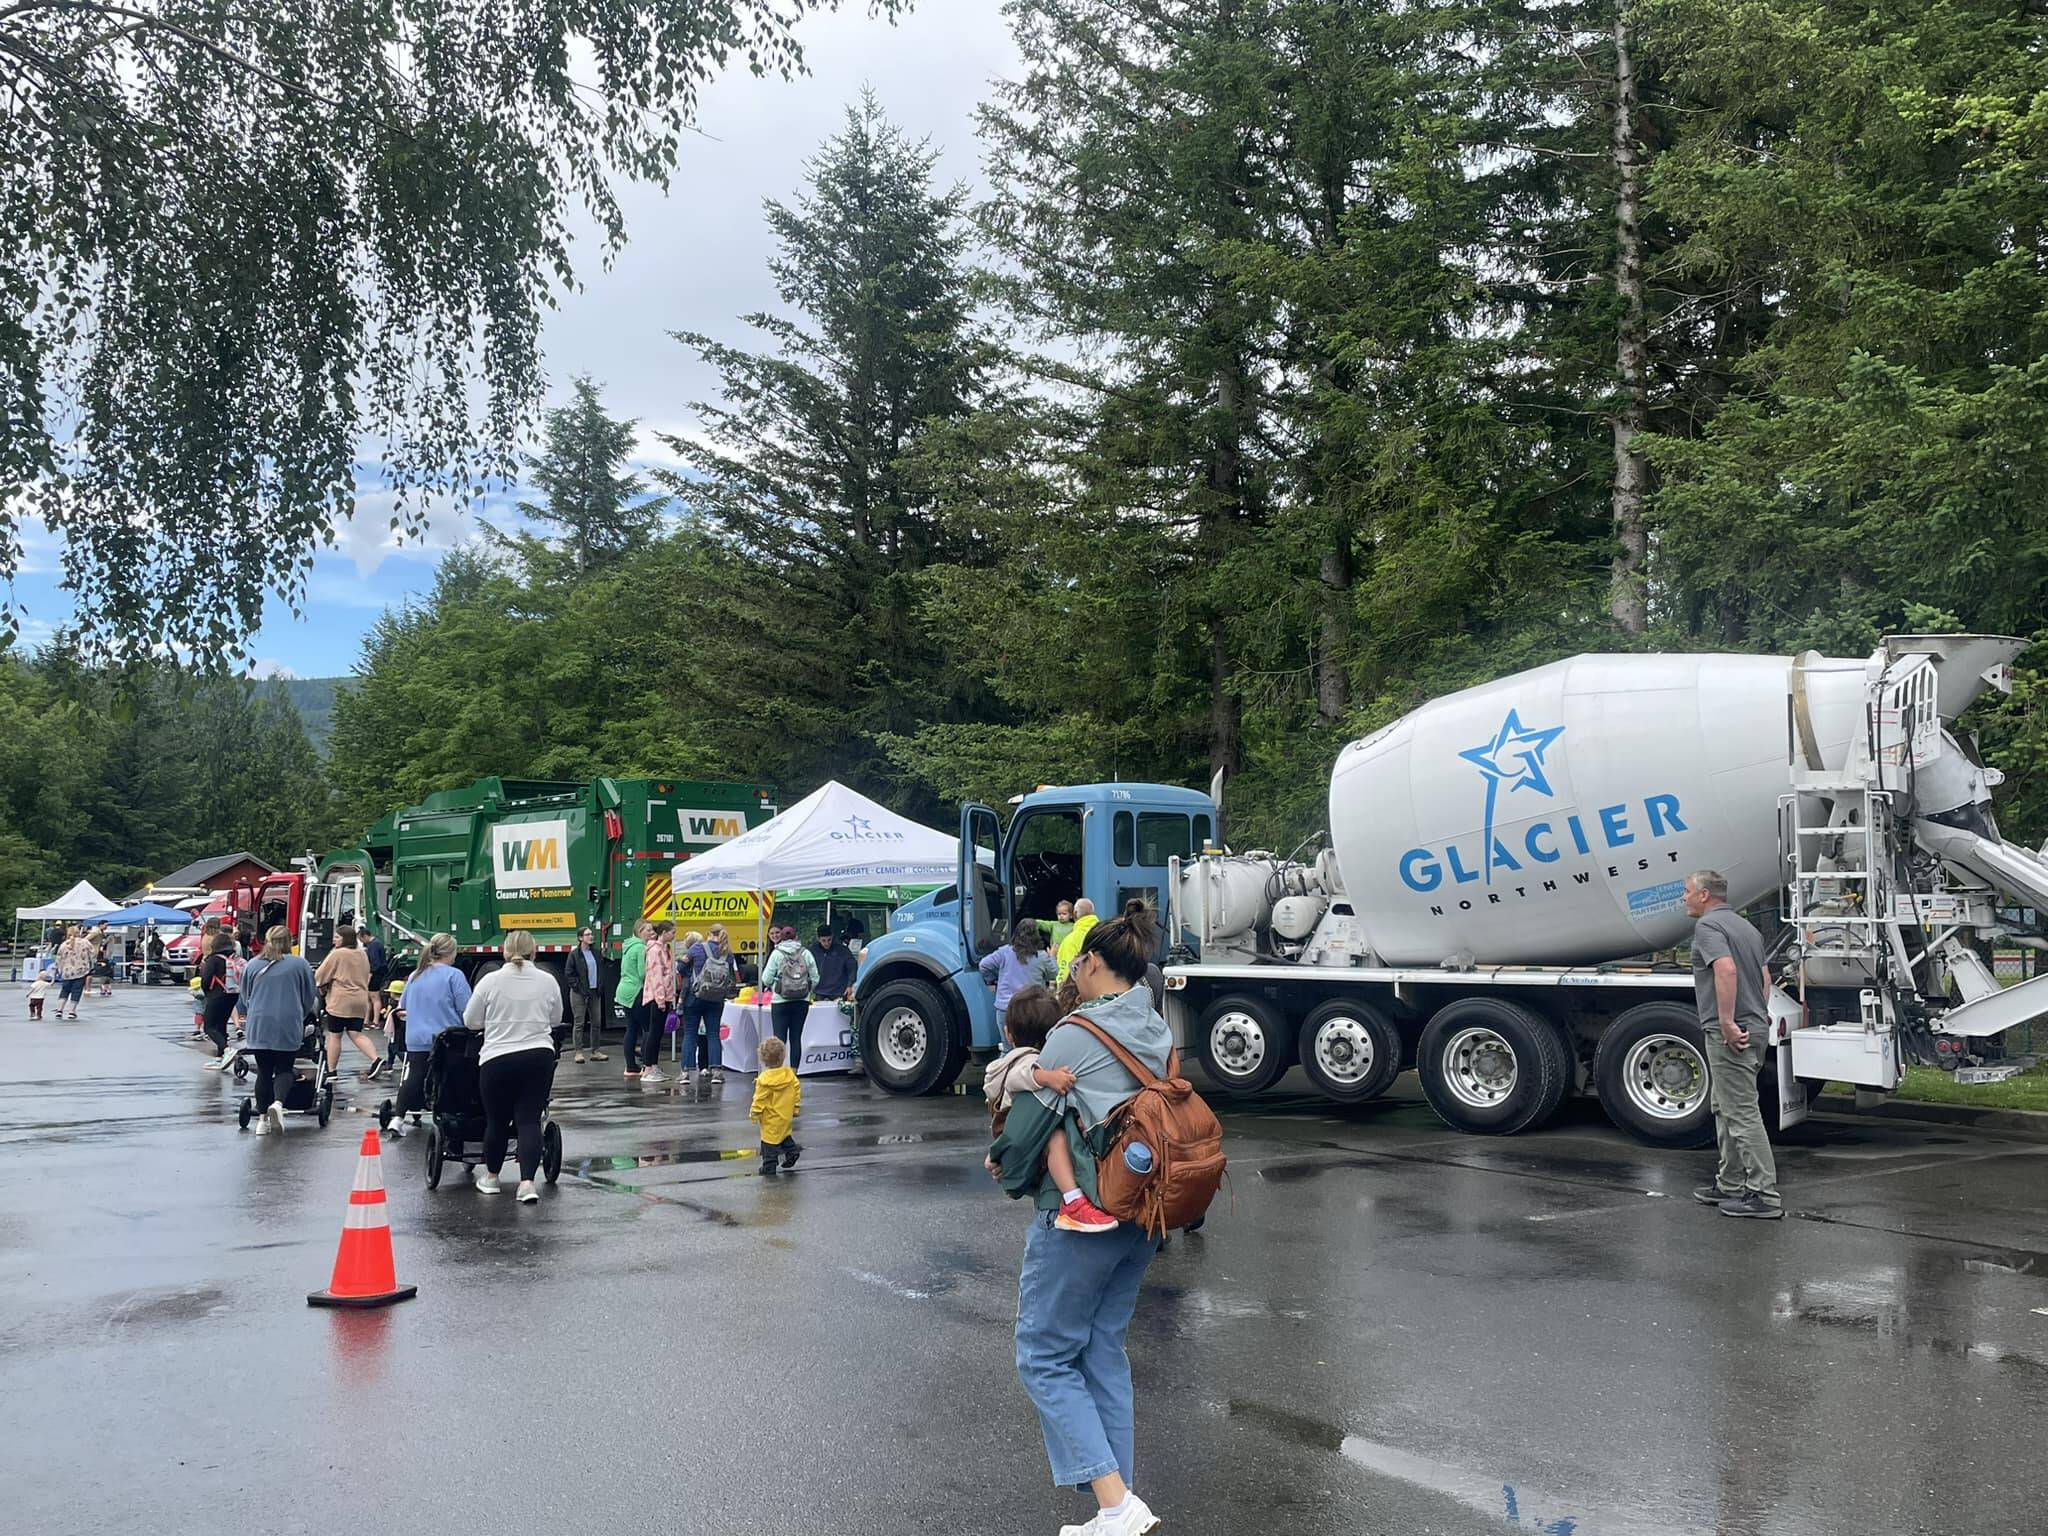 Scenes from Big Truck Day in Snoqualmie. (Photos courtesy of the city of Snoqualmie)